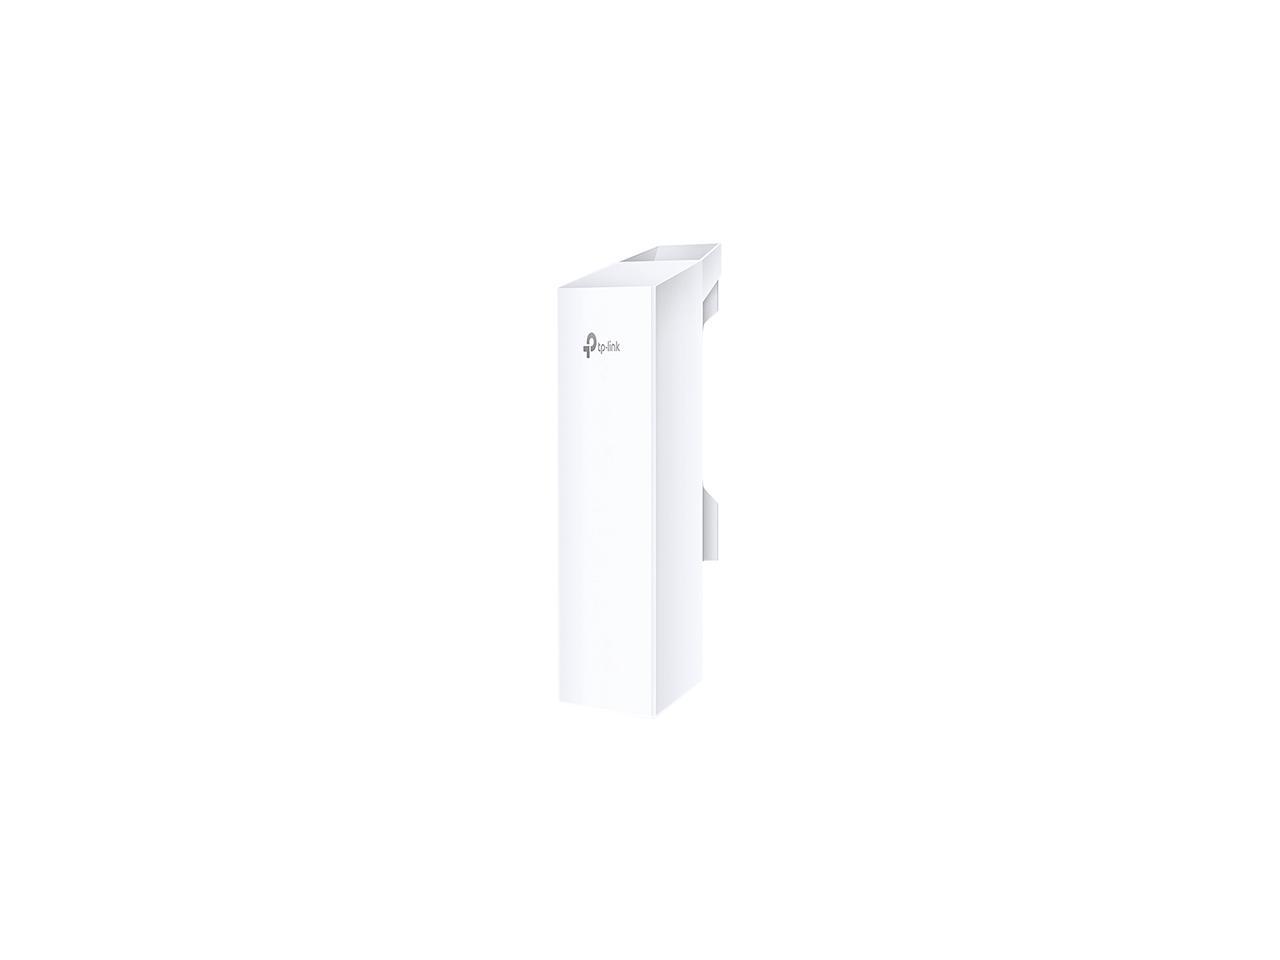 TP-LINK CPE510 5GHz 300Mbps 15KM+ Long Range High Power Outdoor CPE/Access Point, 802.11n/a,dual-polarized 13dBi directional antenna, Passive POE